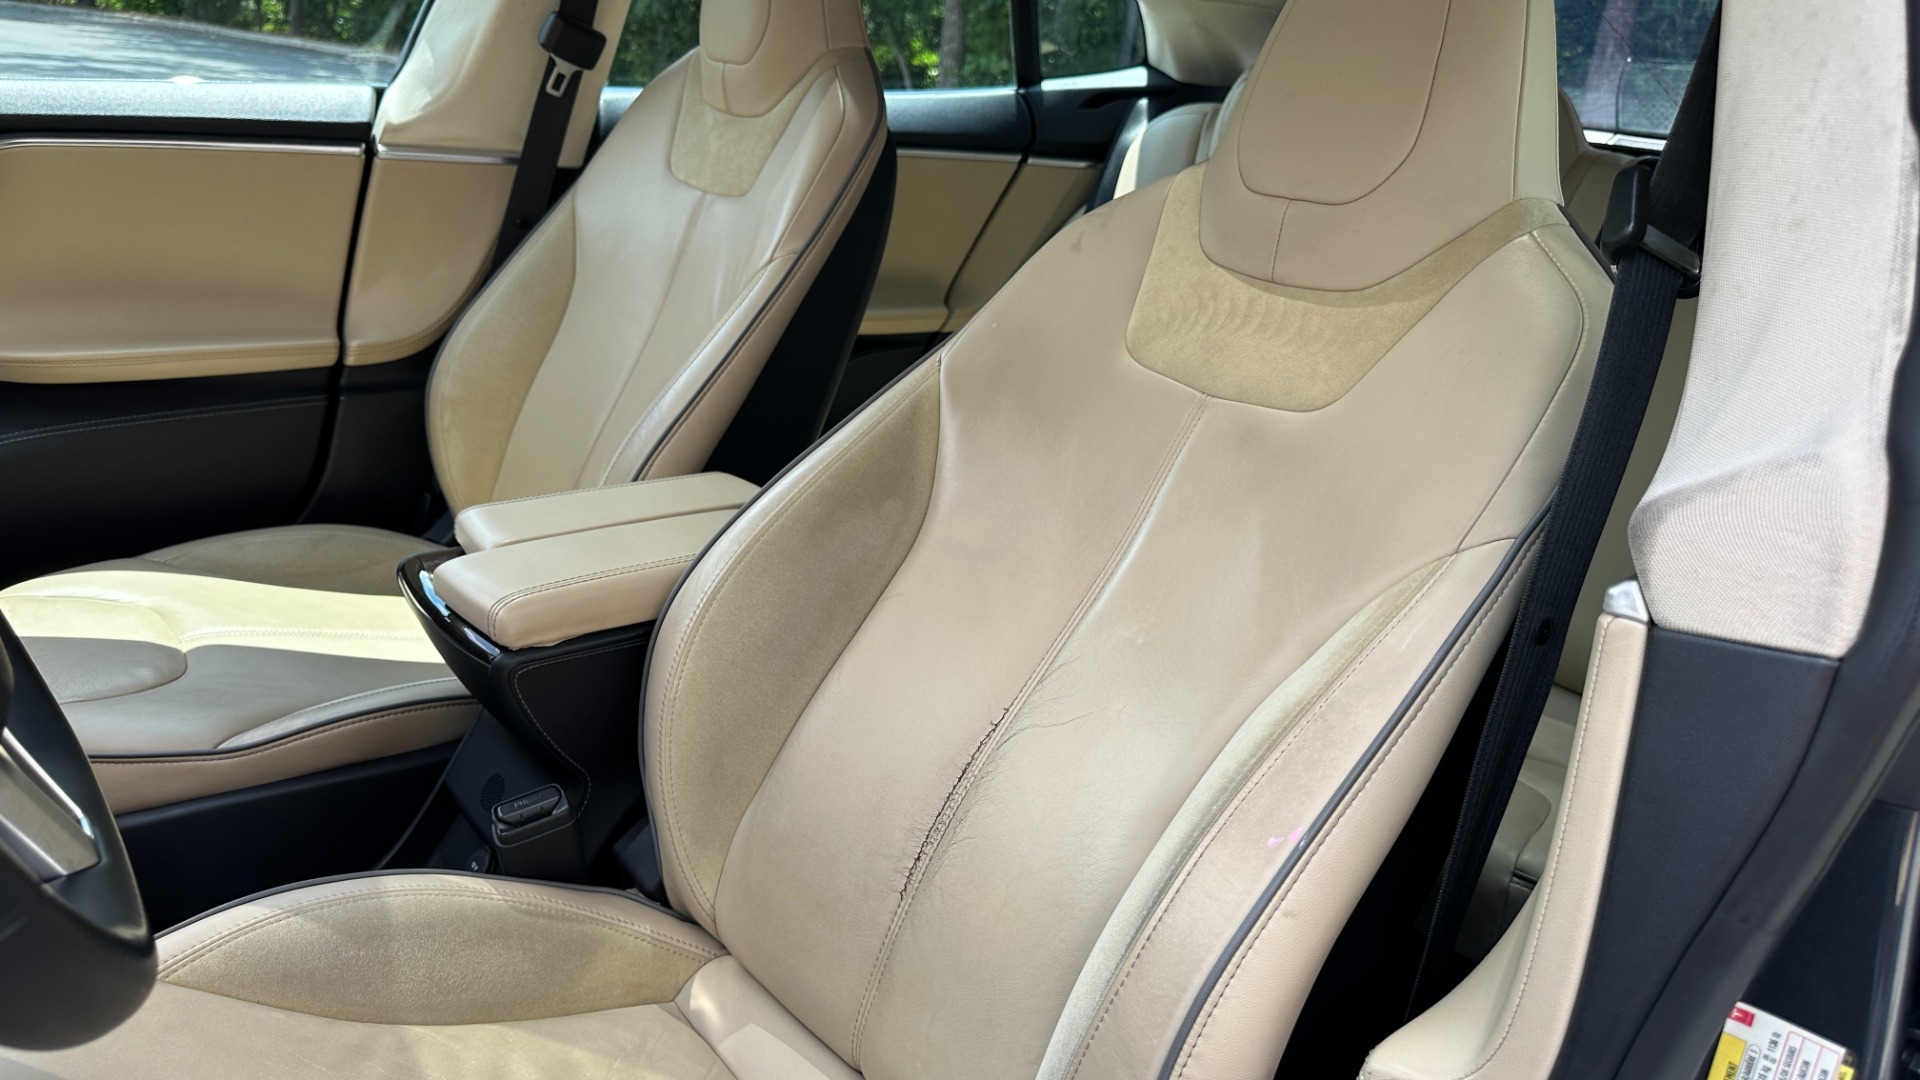 Used 2014 Tesla Model S 60 kWh Battery / 60D / PREMIUM CONNECTIVITY / LEATHER / SUNROOF for sale $22,995 at Formula Imports in Charlotte NC 28227 13